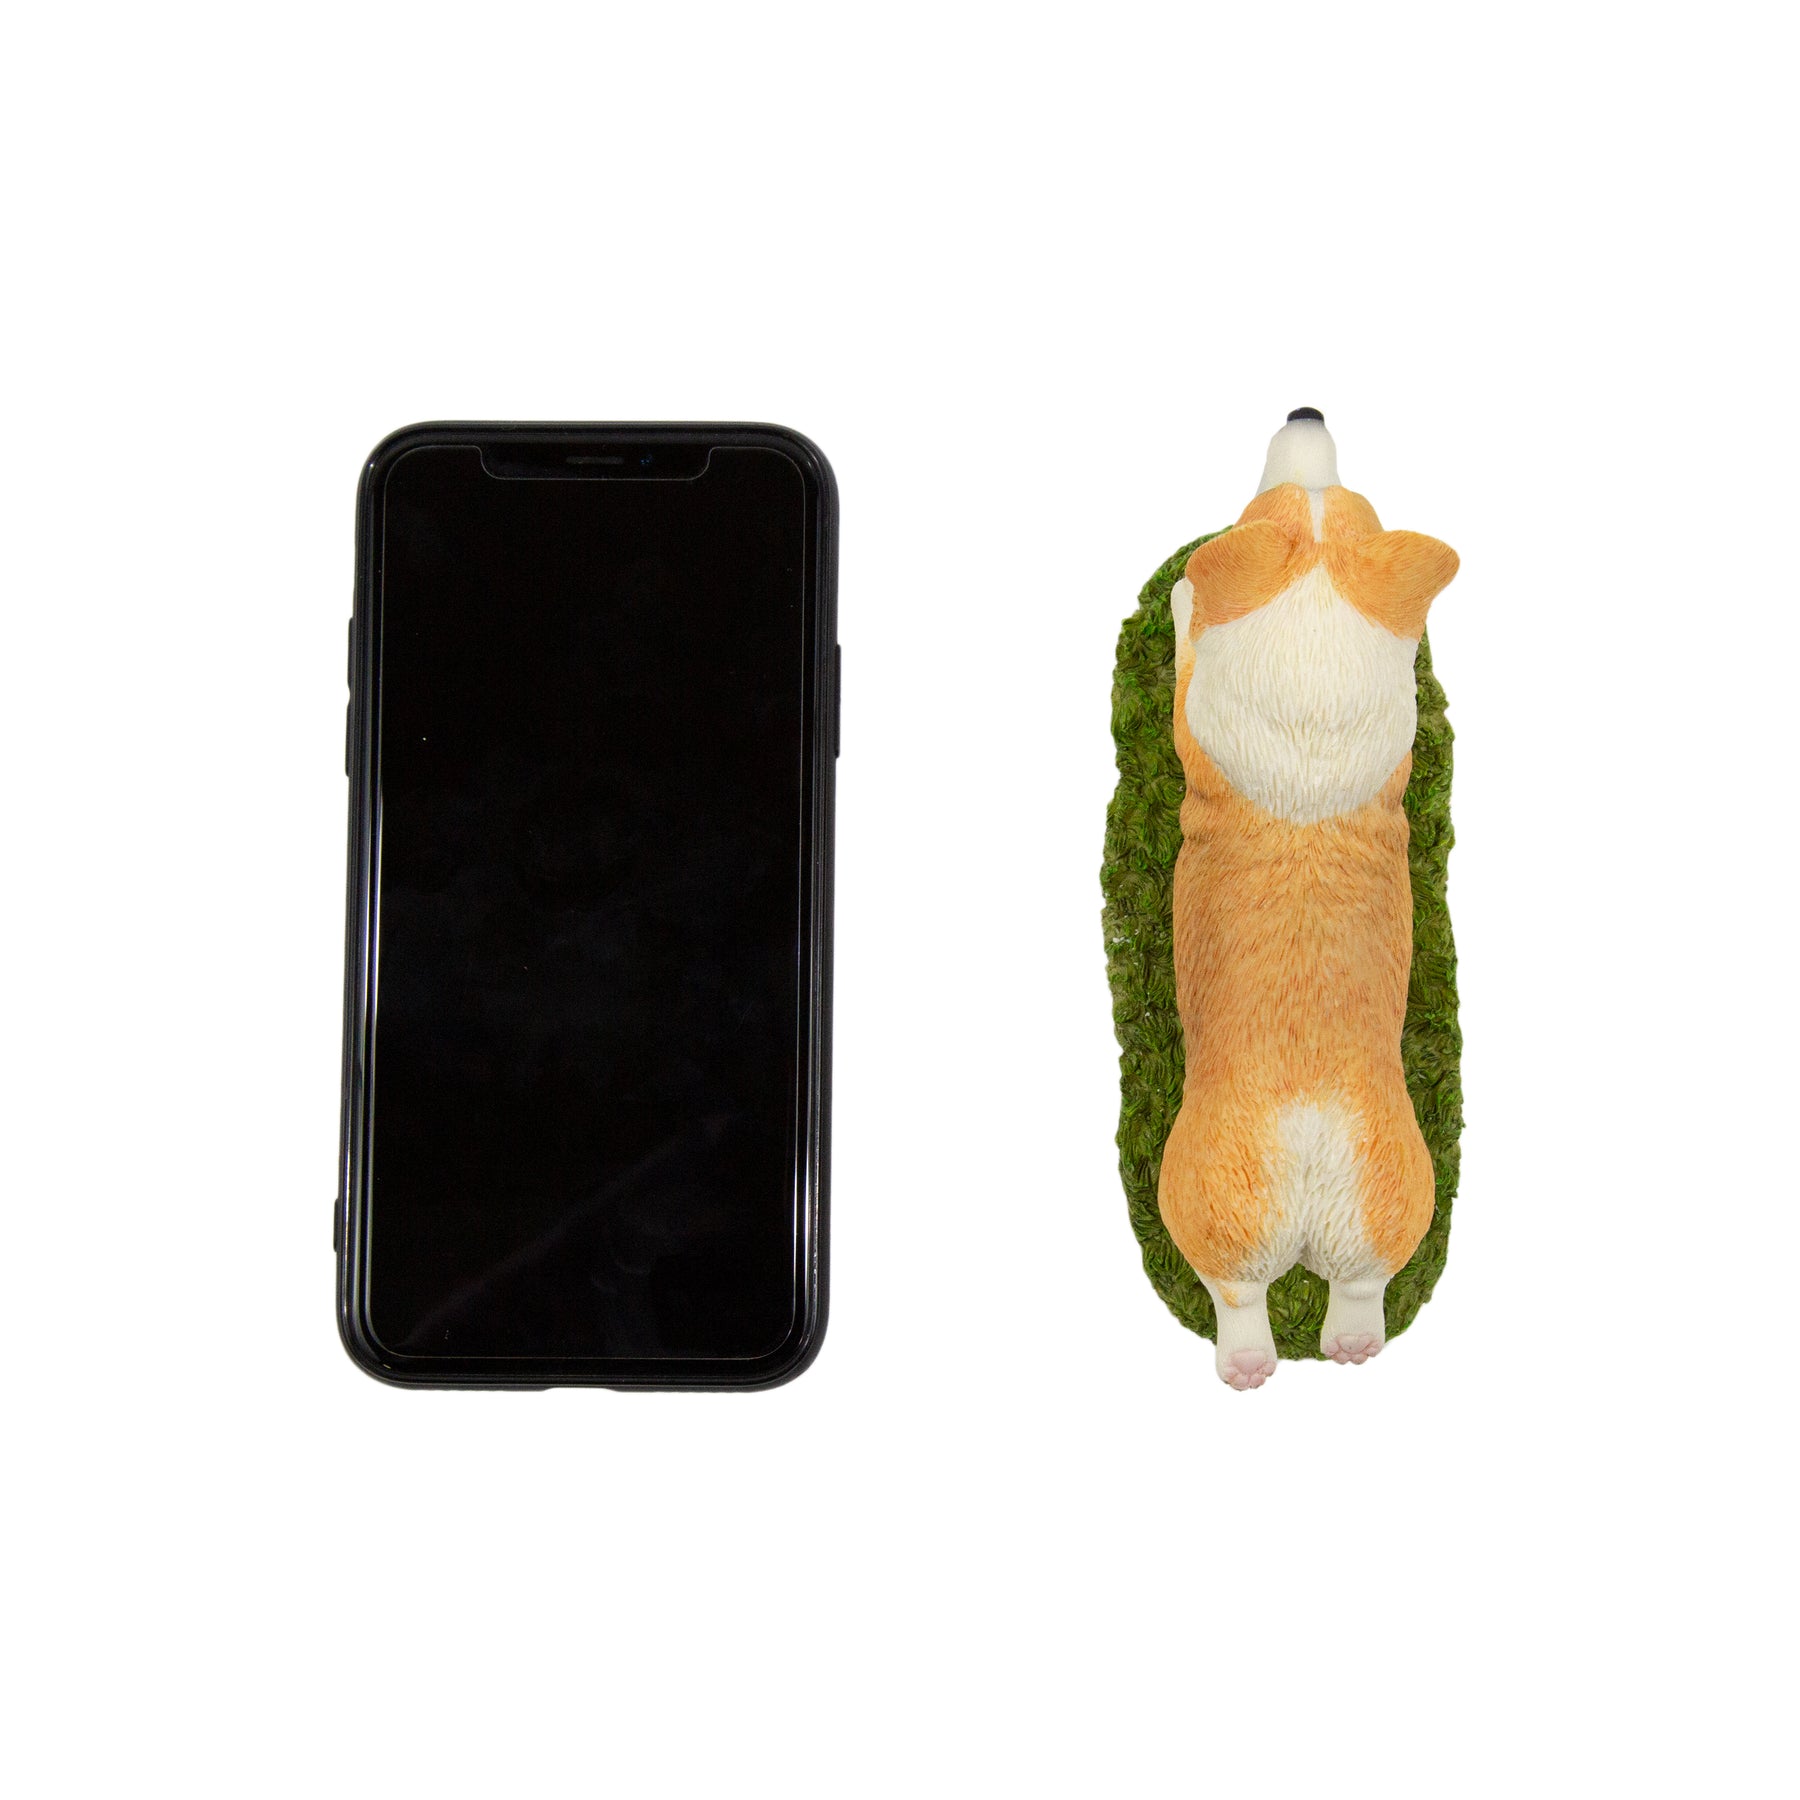 Flying Corgi Figurine next to cellphone for size comparison